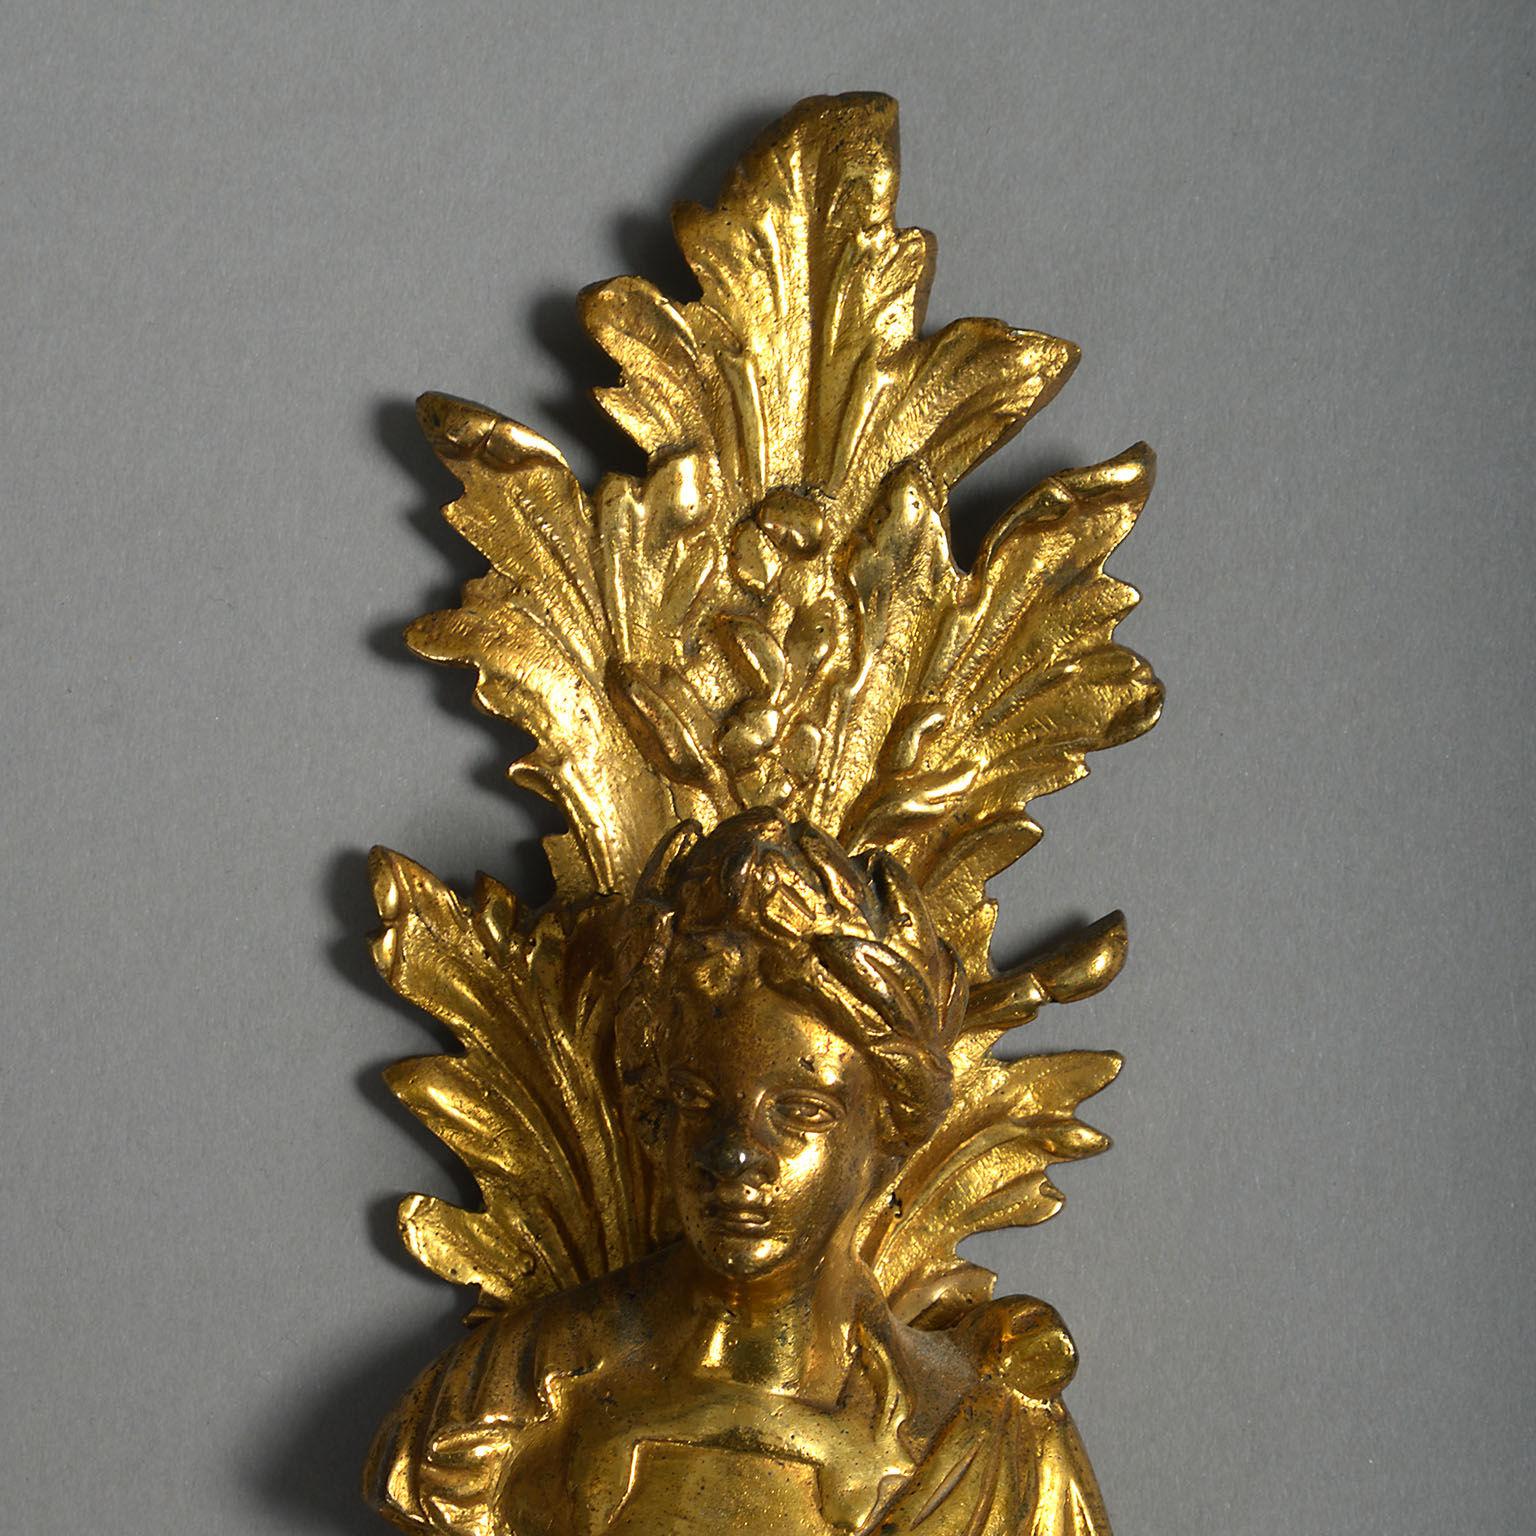 The gilt brass backplates formed of tapering pedestals surmounted by opposing busts with foliate surrounds and supporting two candle-branches.